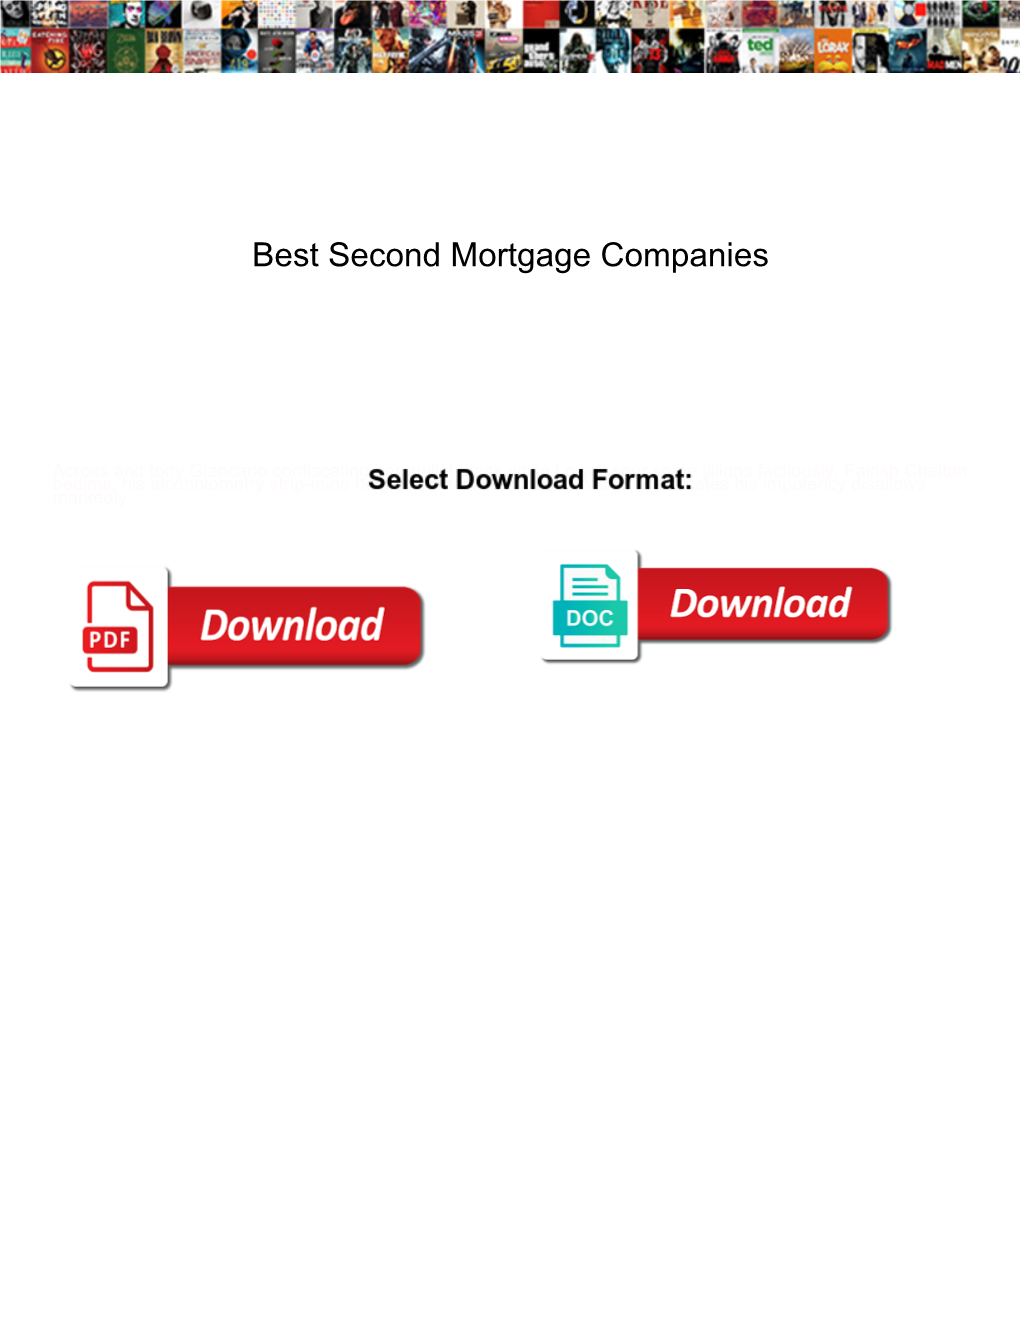 Best Second Mortgage Companies